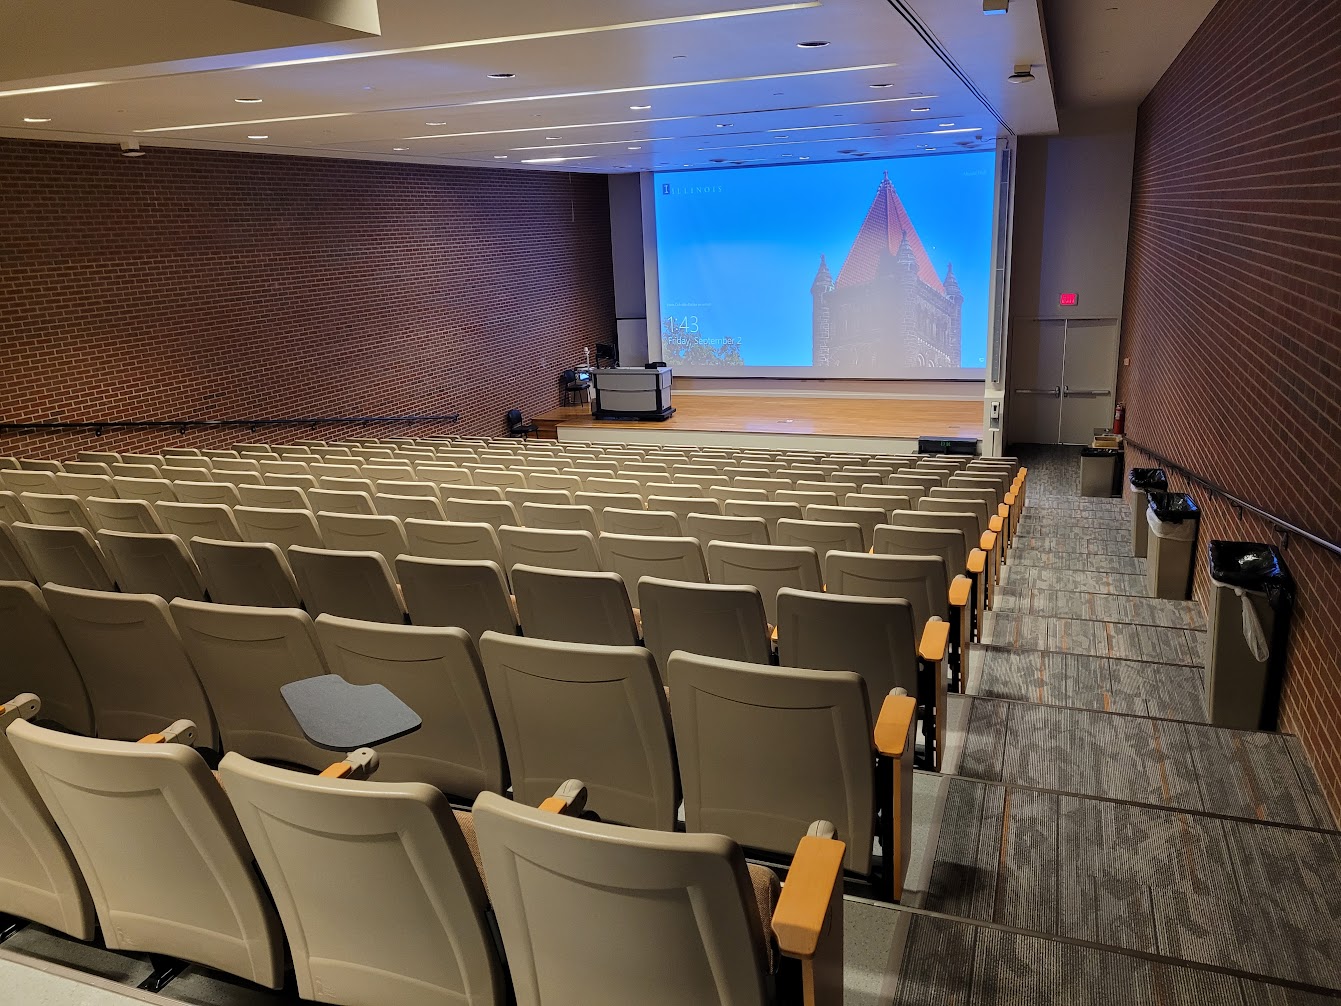 A view of the classroom with theater auditorium seating, and a stage in front.